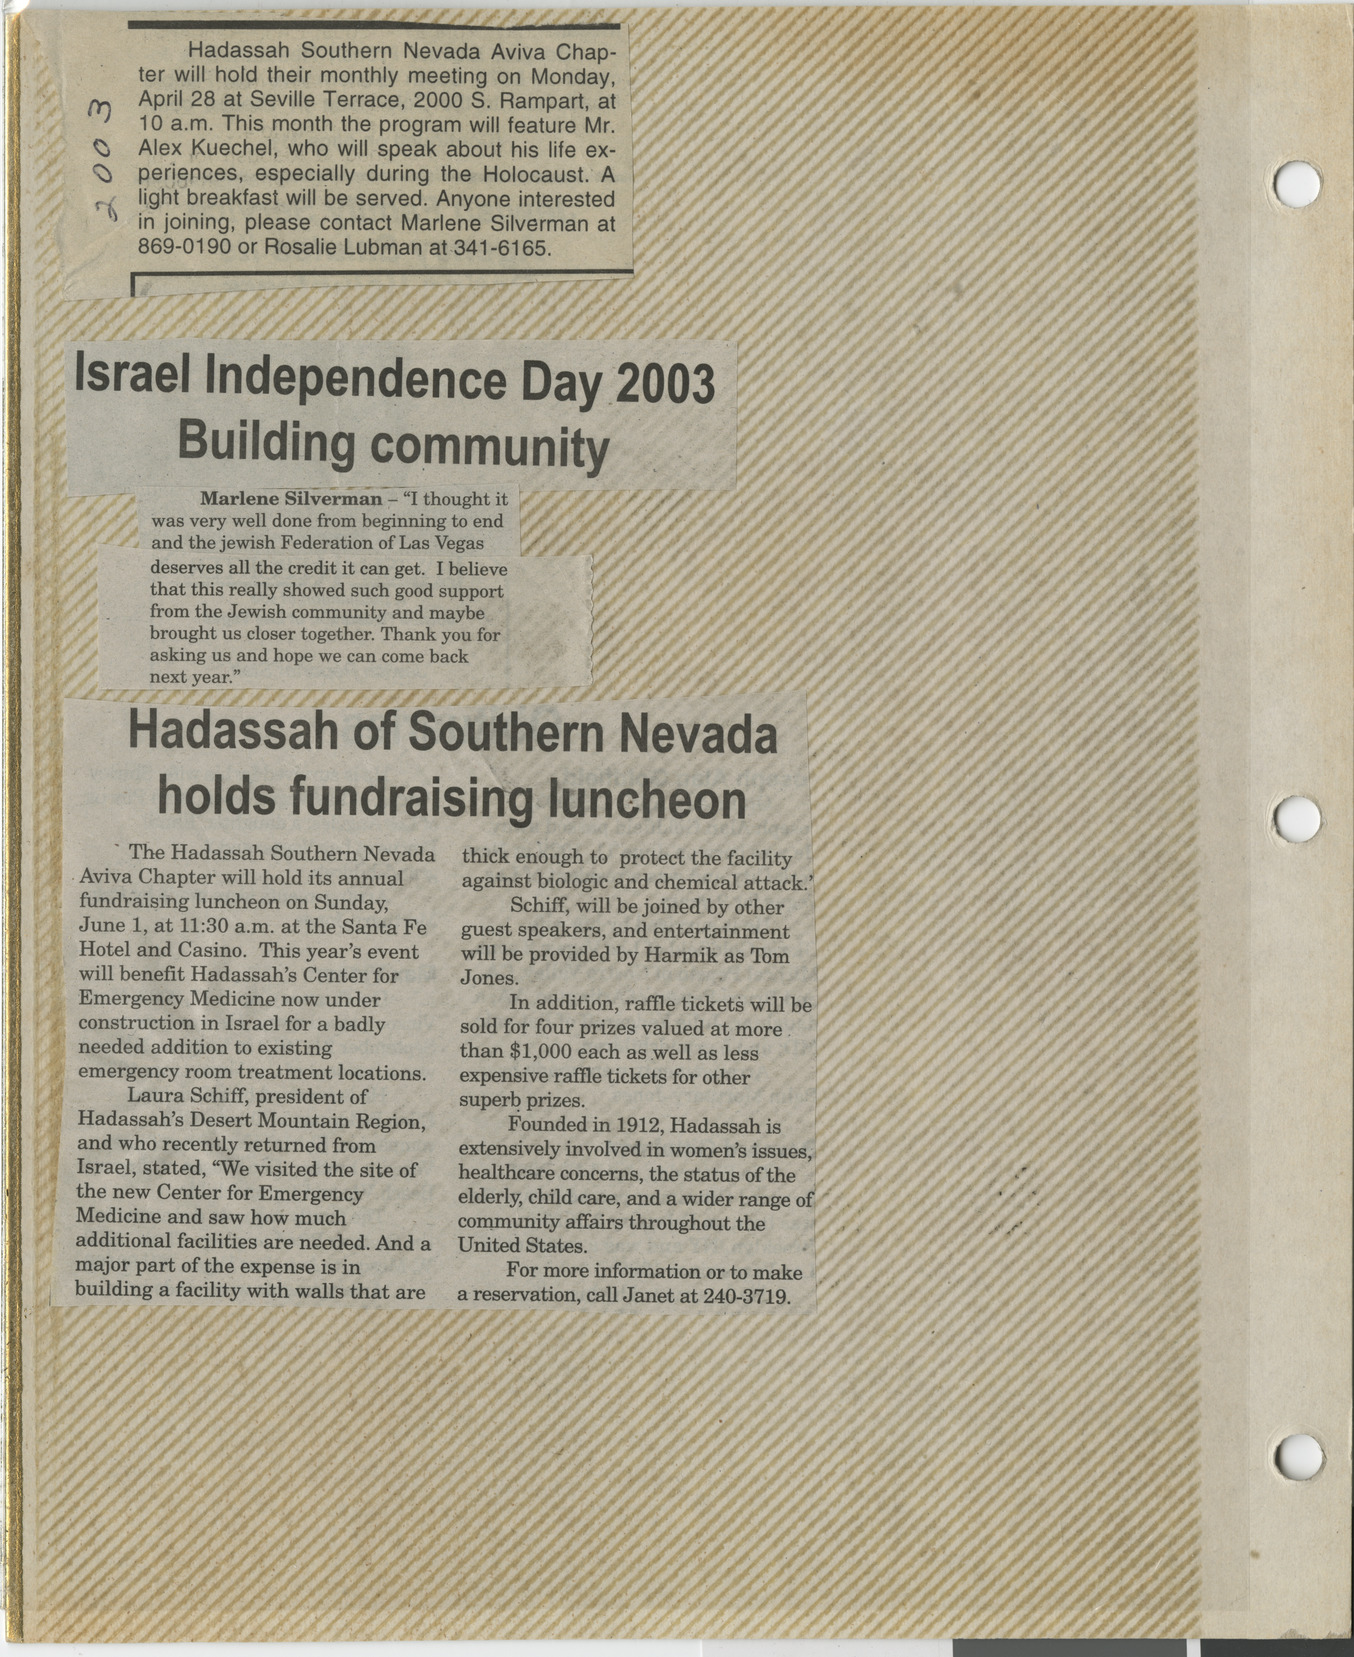 Newspaper clippings for Hadassah events, 2003